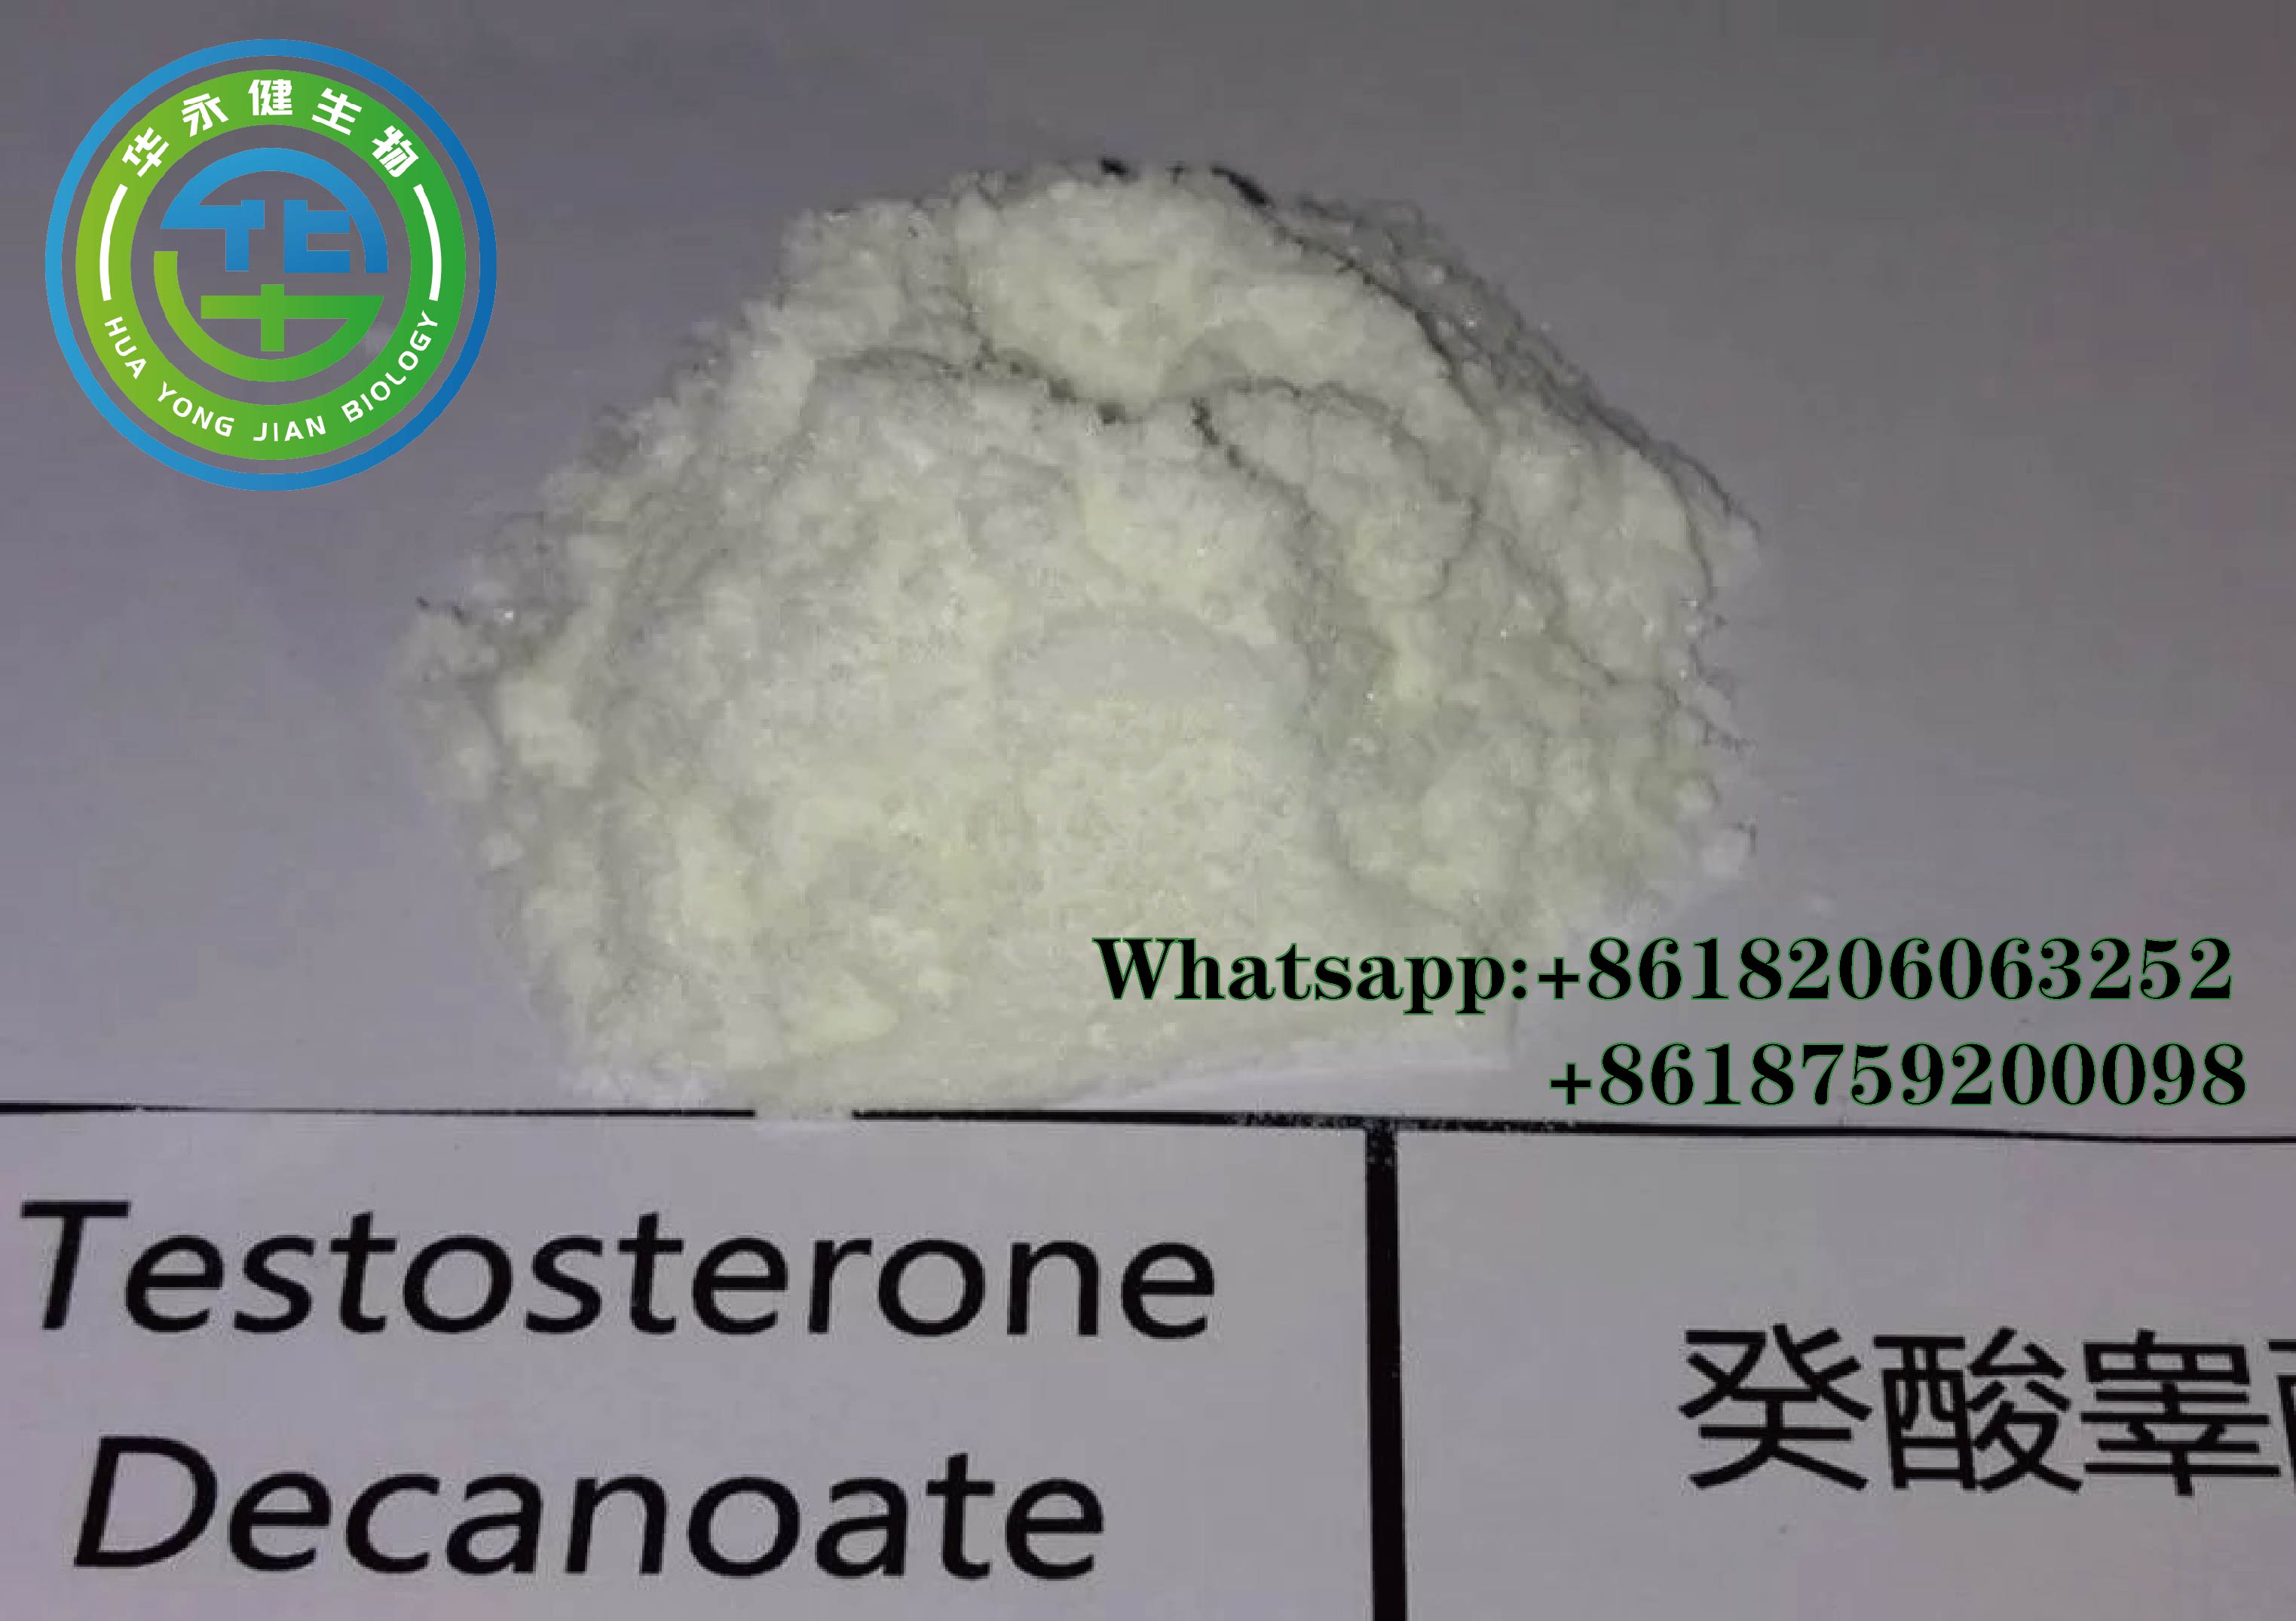 99.9% Purity Test Decanoate Raw Steroids Powder Domestic Shipping to Us Free Resending